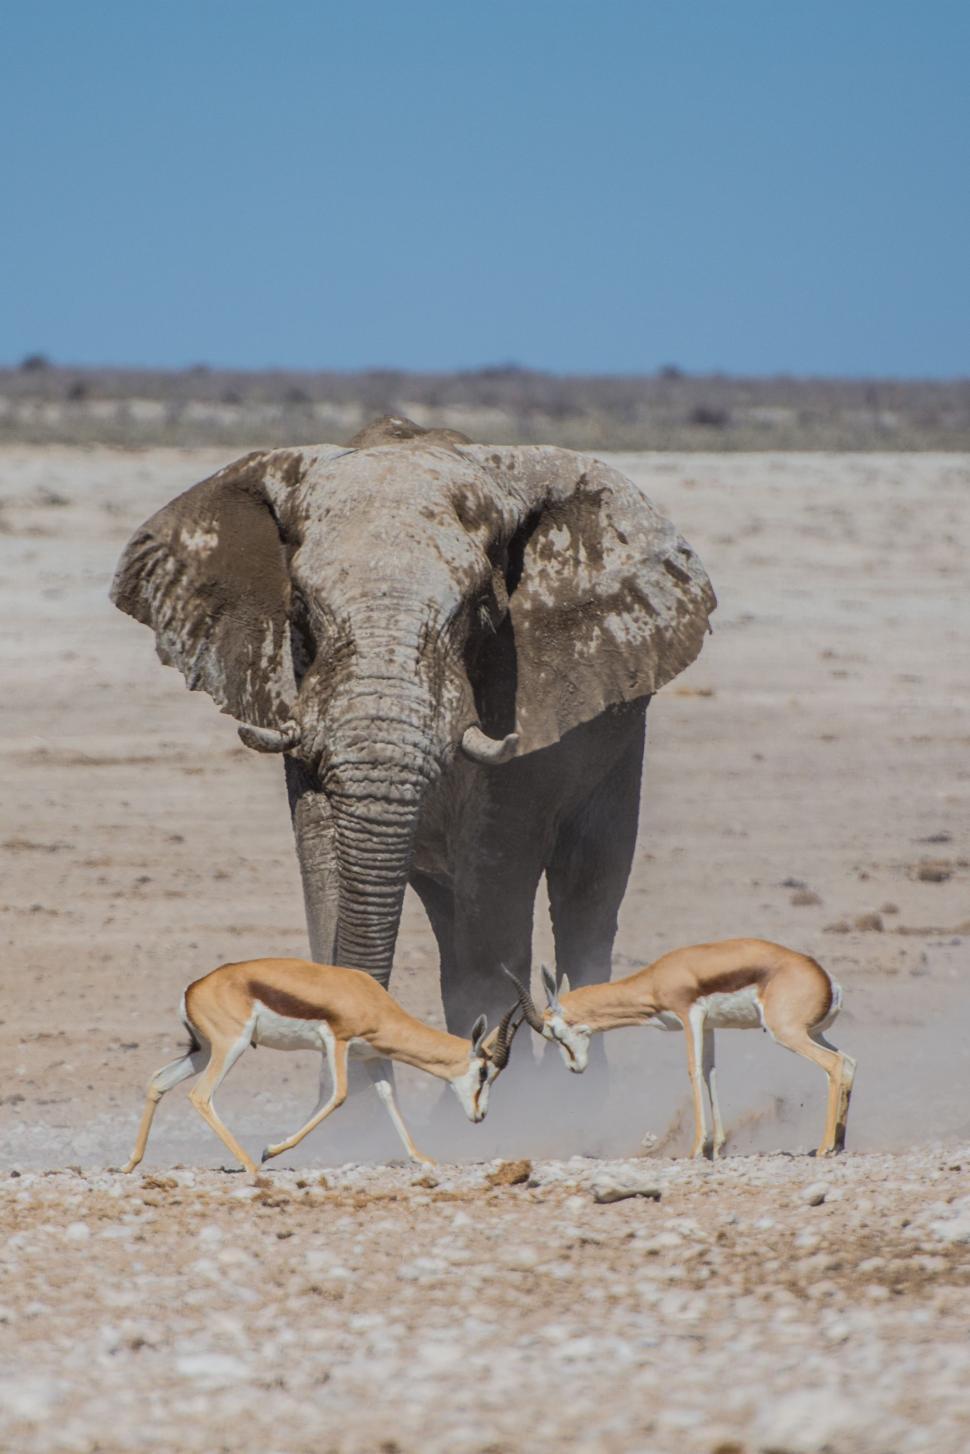 Free Image of Antelope and Elephant in the Desert 